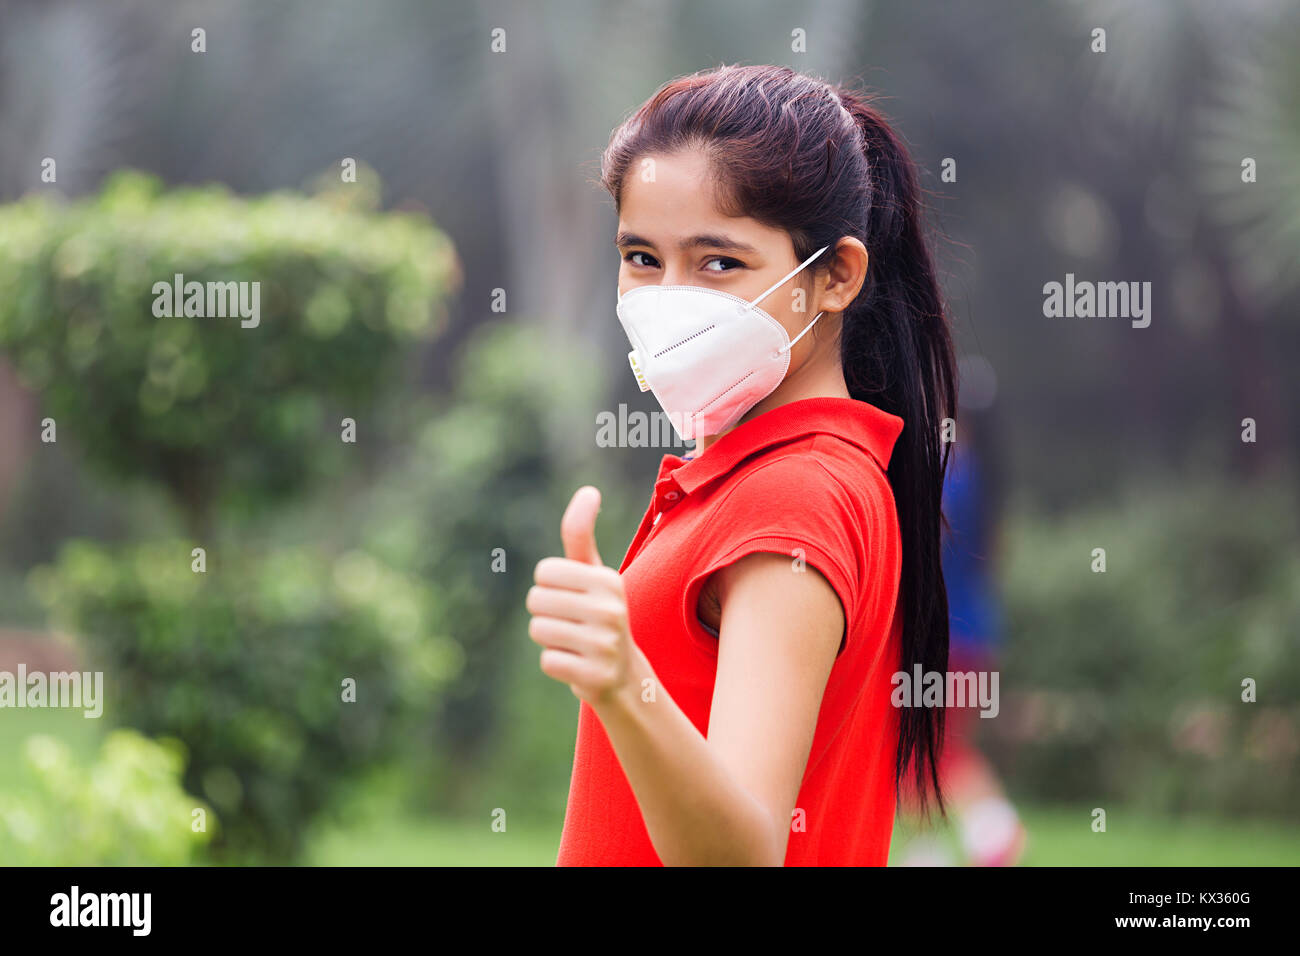 Young Girl Face Air Pollution Problem In Park Stock Photo